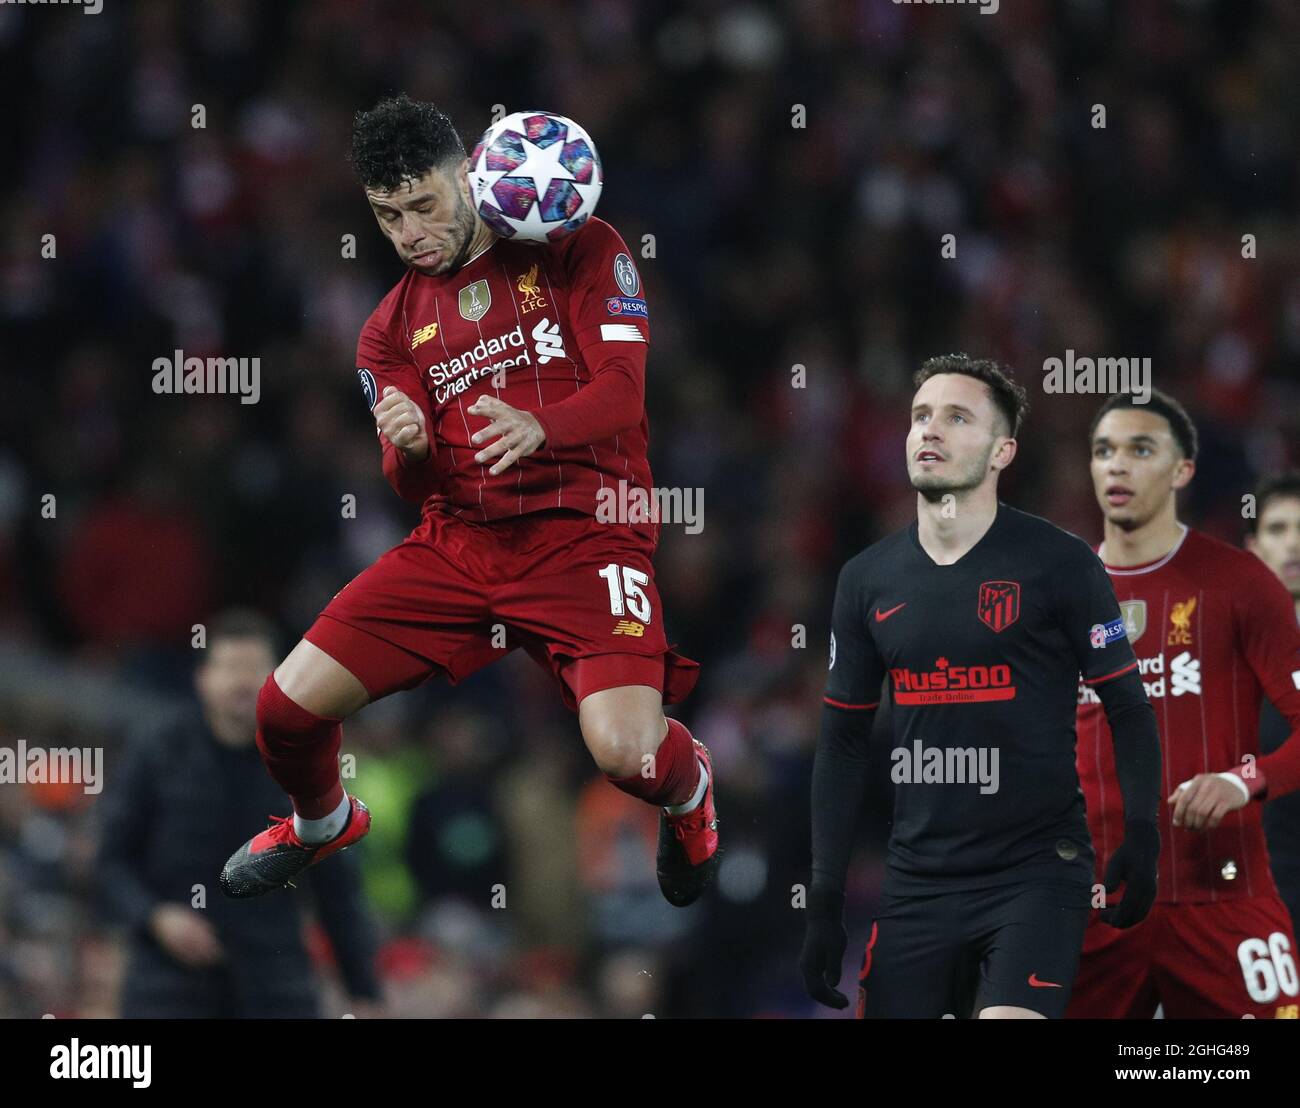 Alex Oxlade-Chamberlain of Liverpool heads clear during the UEFA Champions  League match at Anfield, Liverpool. Picture date: 11th March 2020. Picture  credit should read: Darren Staples/Sportimage via PA Images Stock Photo -